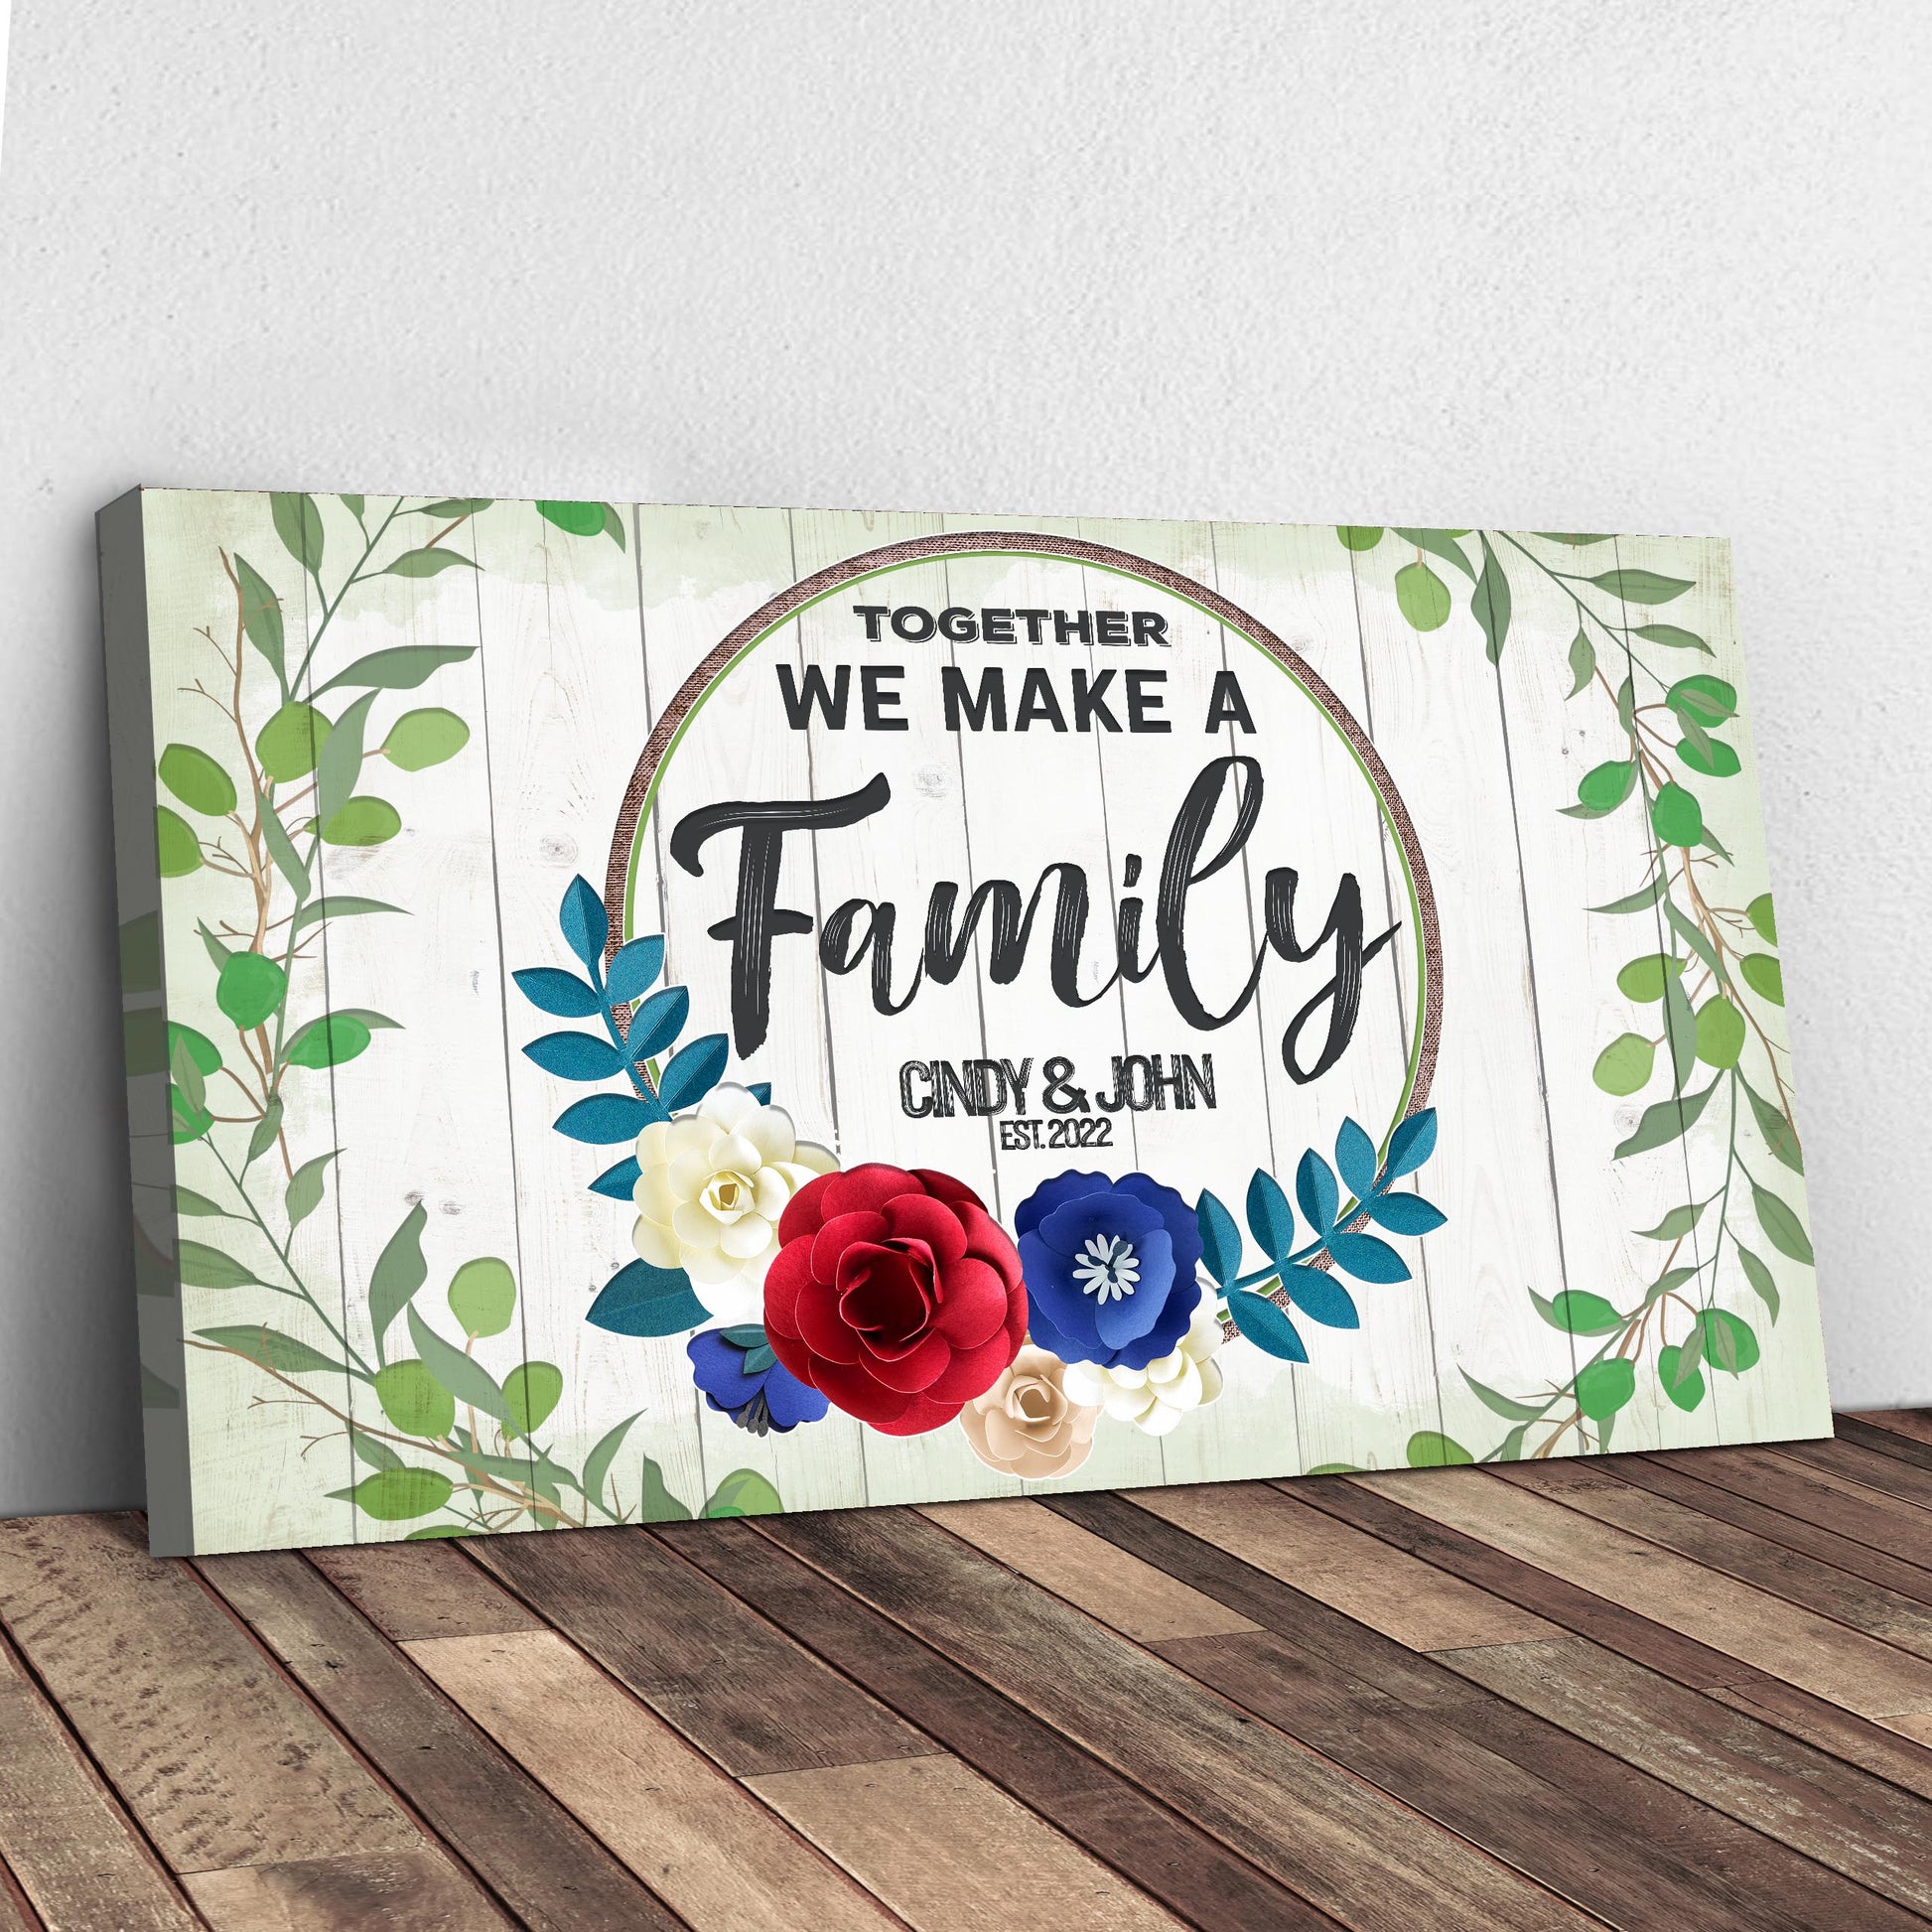 Together We Make A Family Sign Style 1 - Image by Tailored Canvases